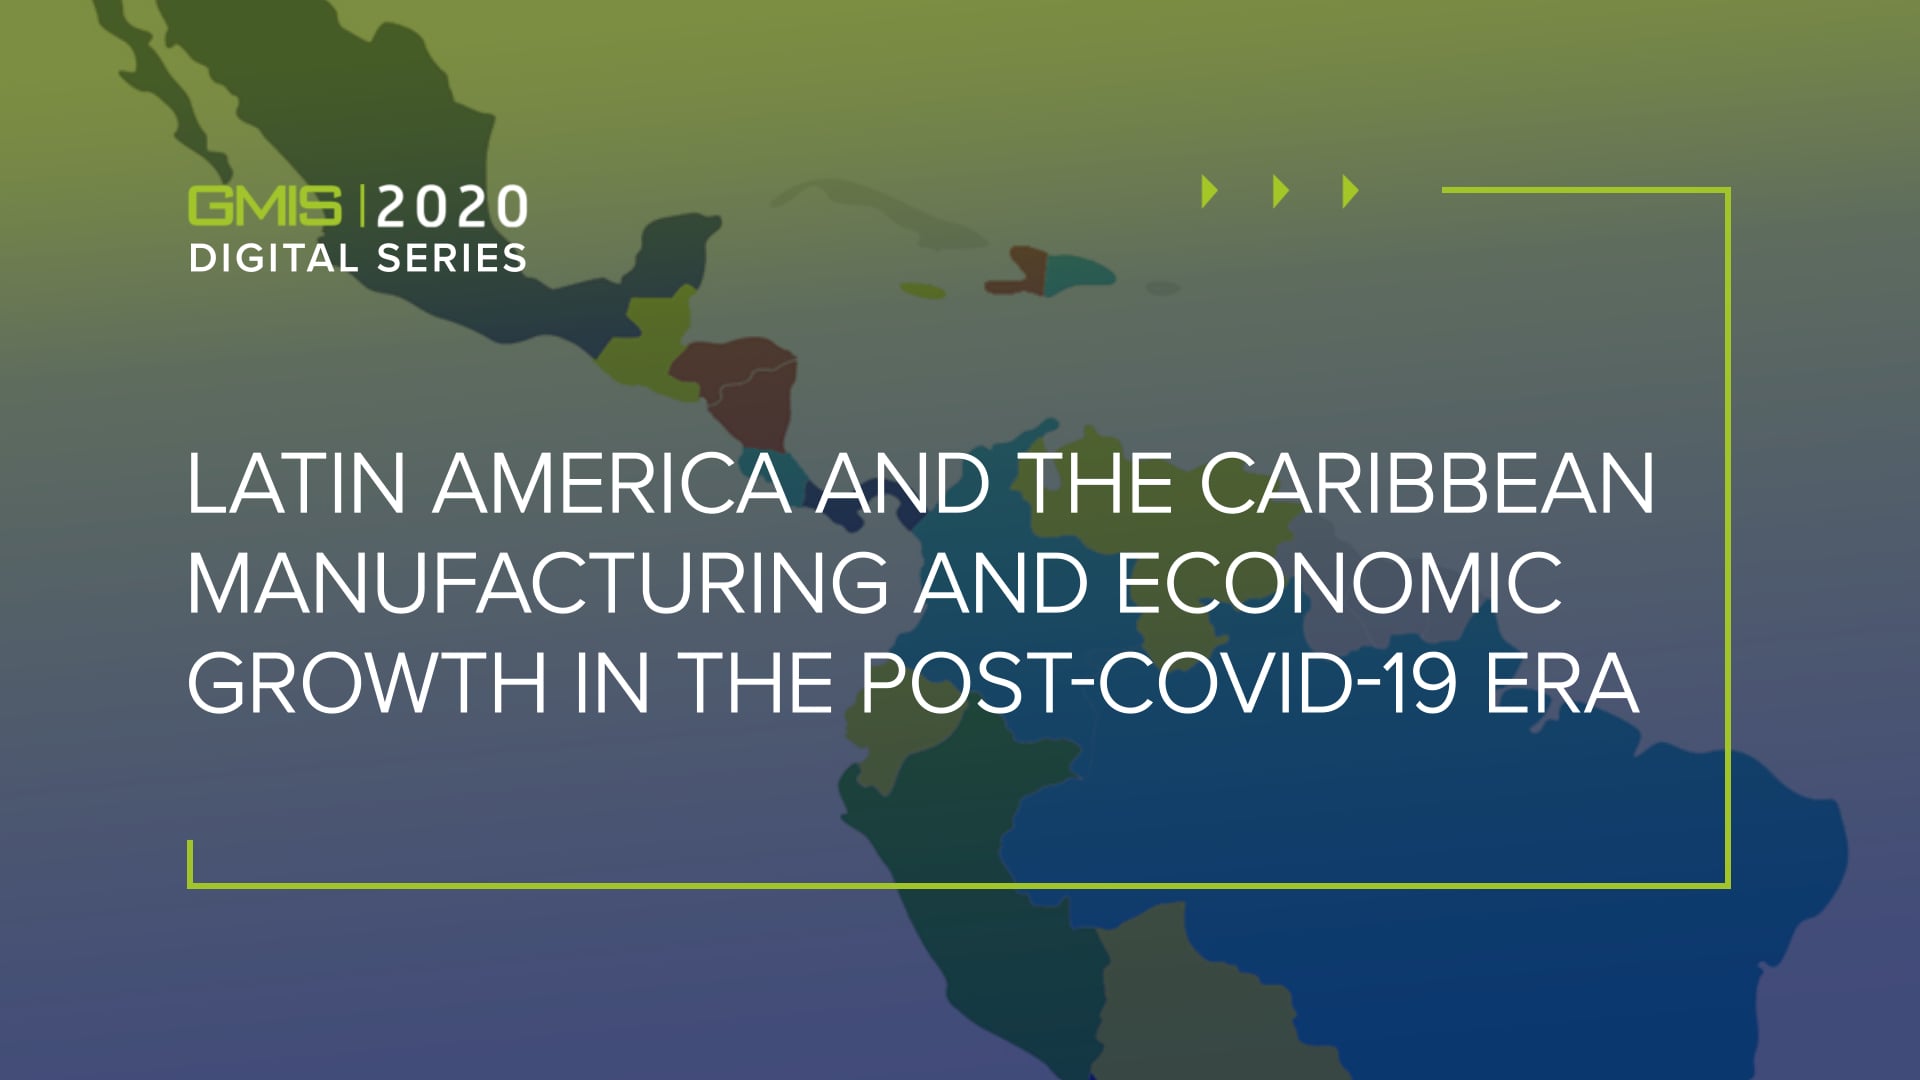 Latin America and the Caribbean manufacturing and economic growth in the post-COVID-19 era